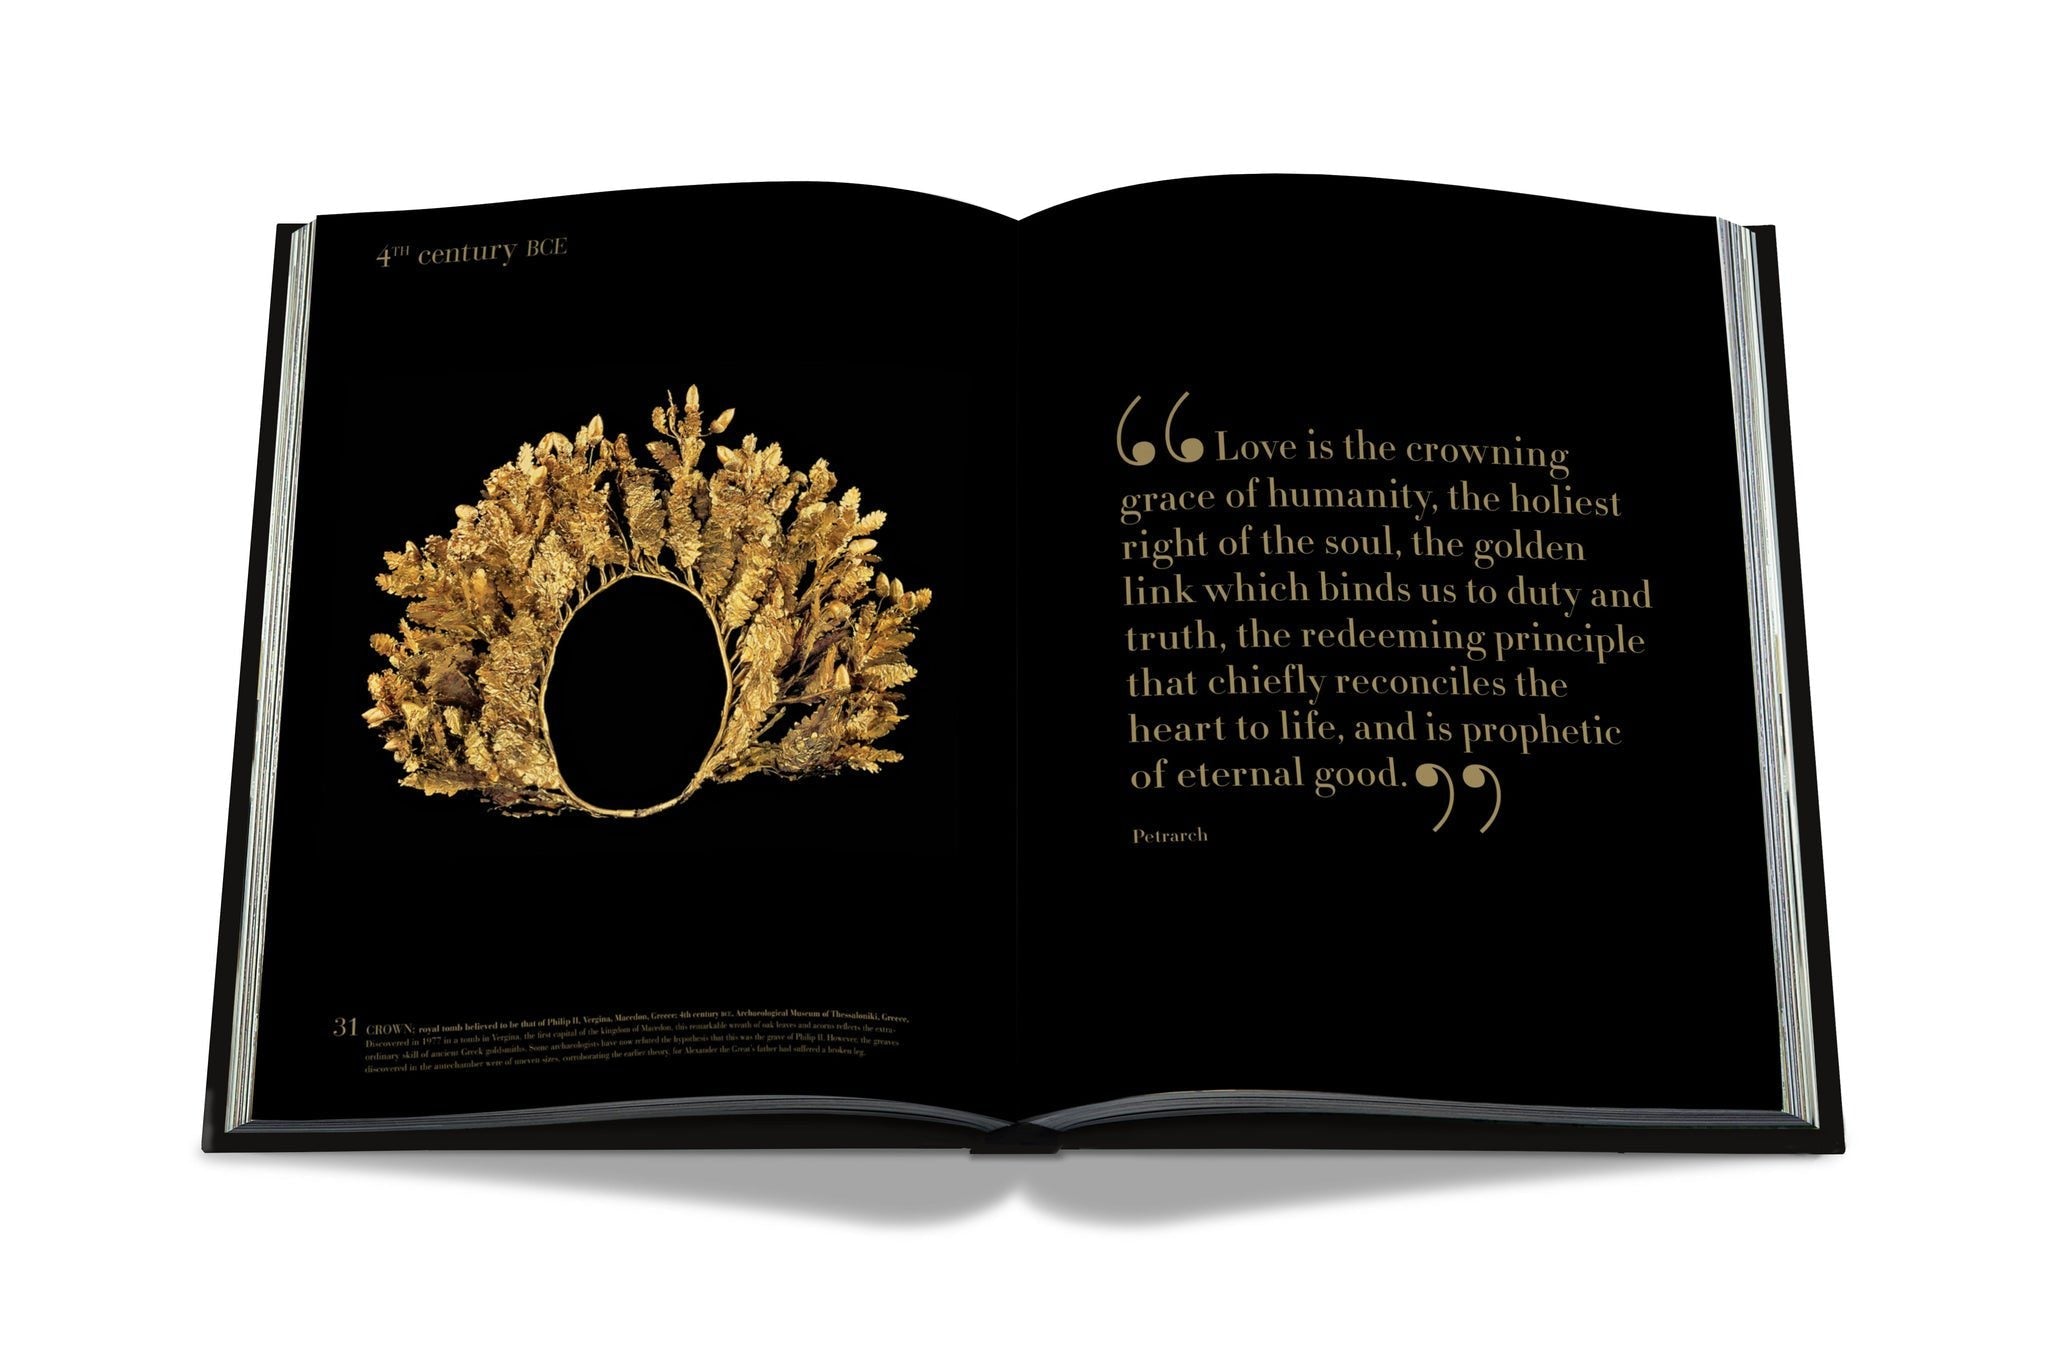 Assouline The Impossible Collection: Guld